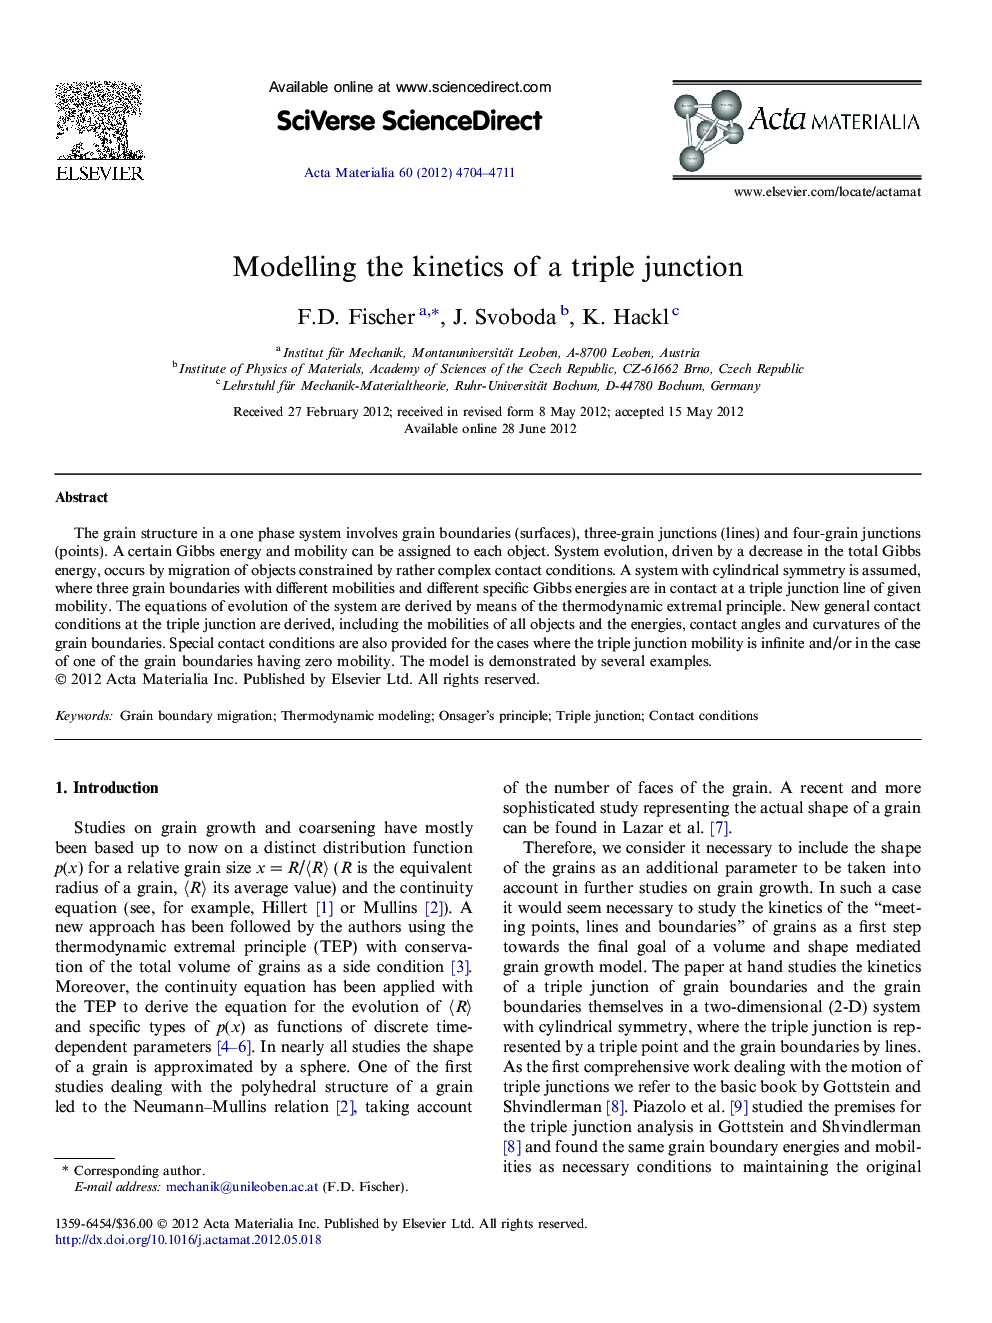 Modelling the kinetics of a triple junction